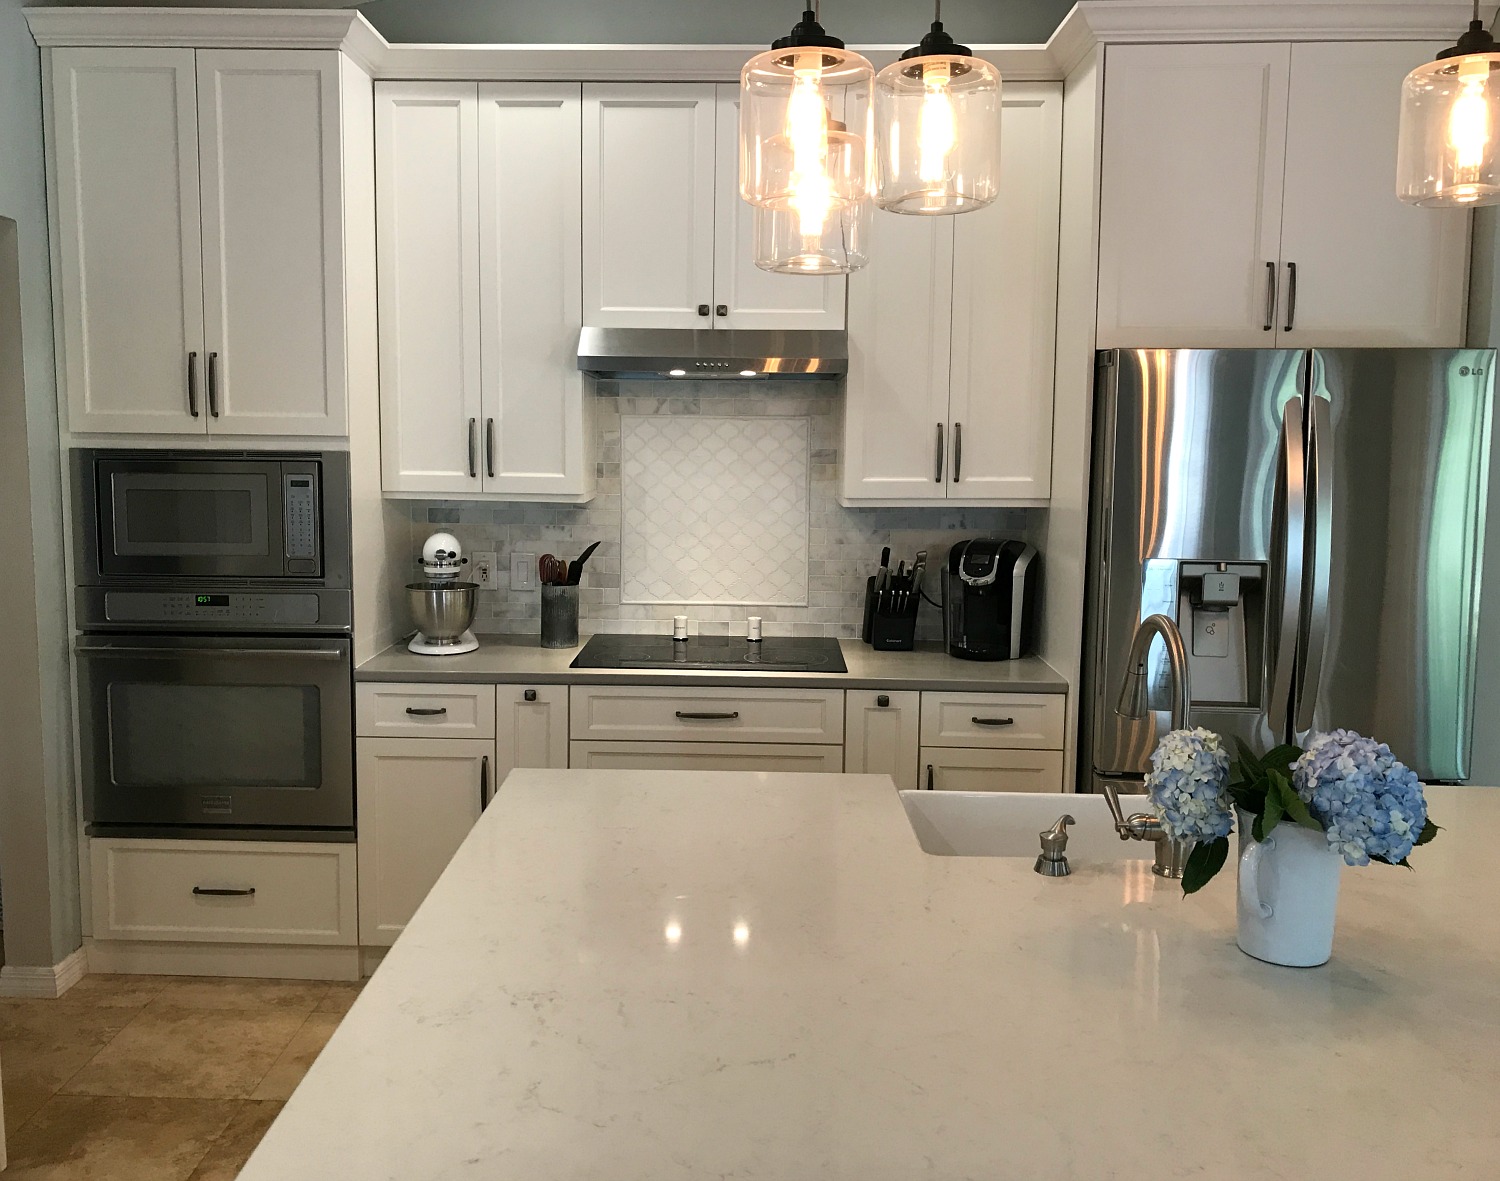 Are you looking to remodel your home and add a modern farmhouse kitchen? Check out what we did and get some design inspiration!